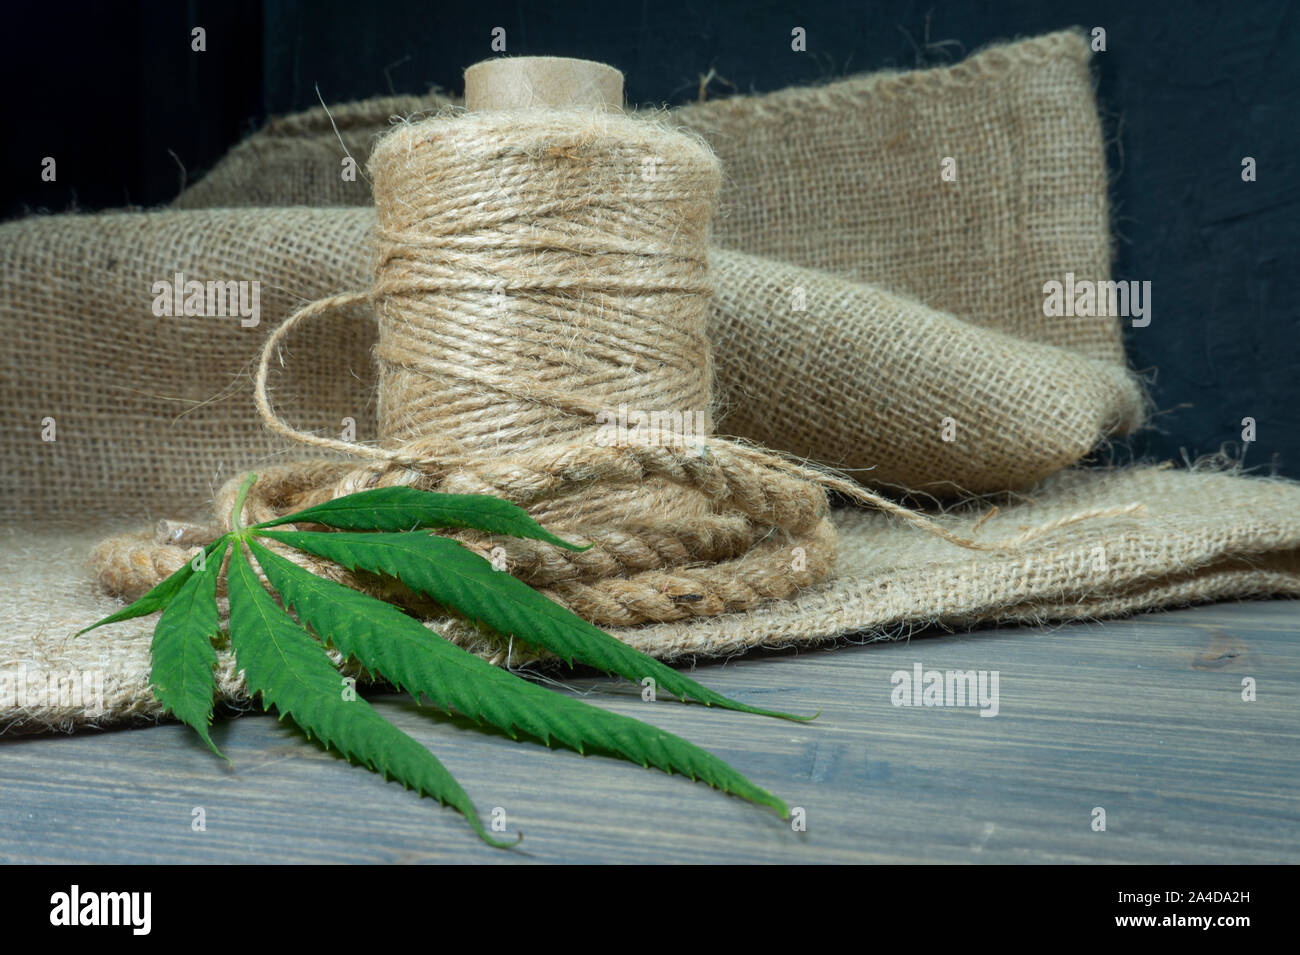 Conceptual types of cannabis products concept image with a cannabis leaf, hemp fiber rope and fabric on an old wooden surface Stock Photo